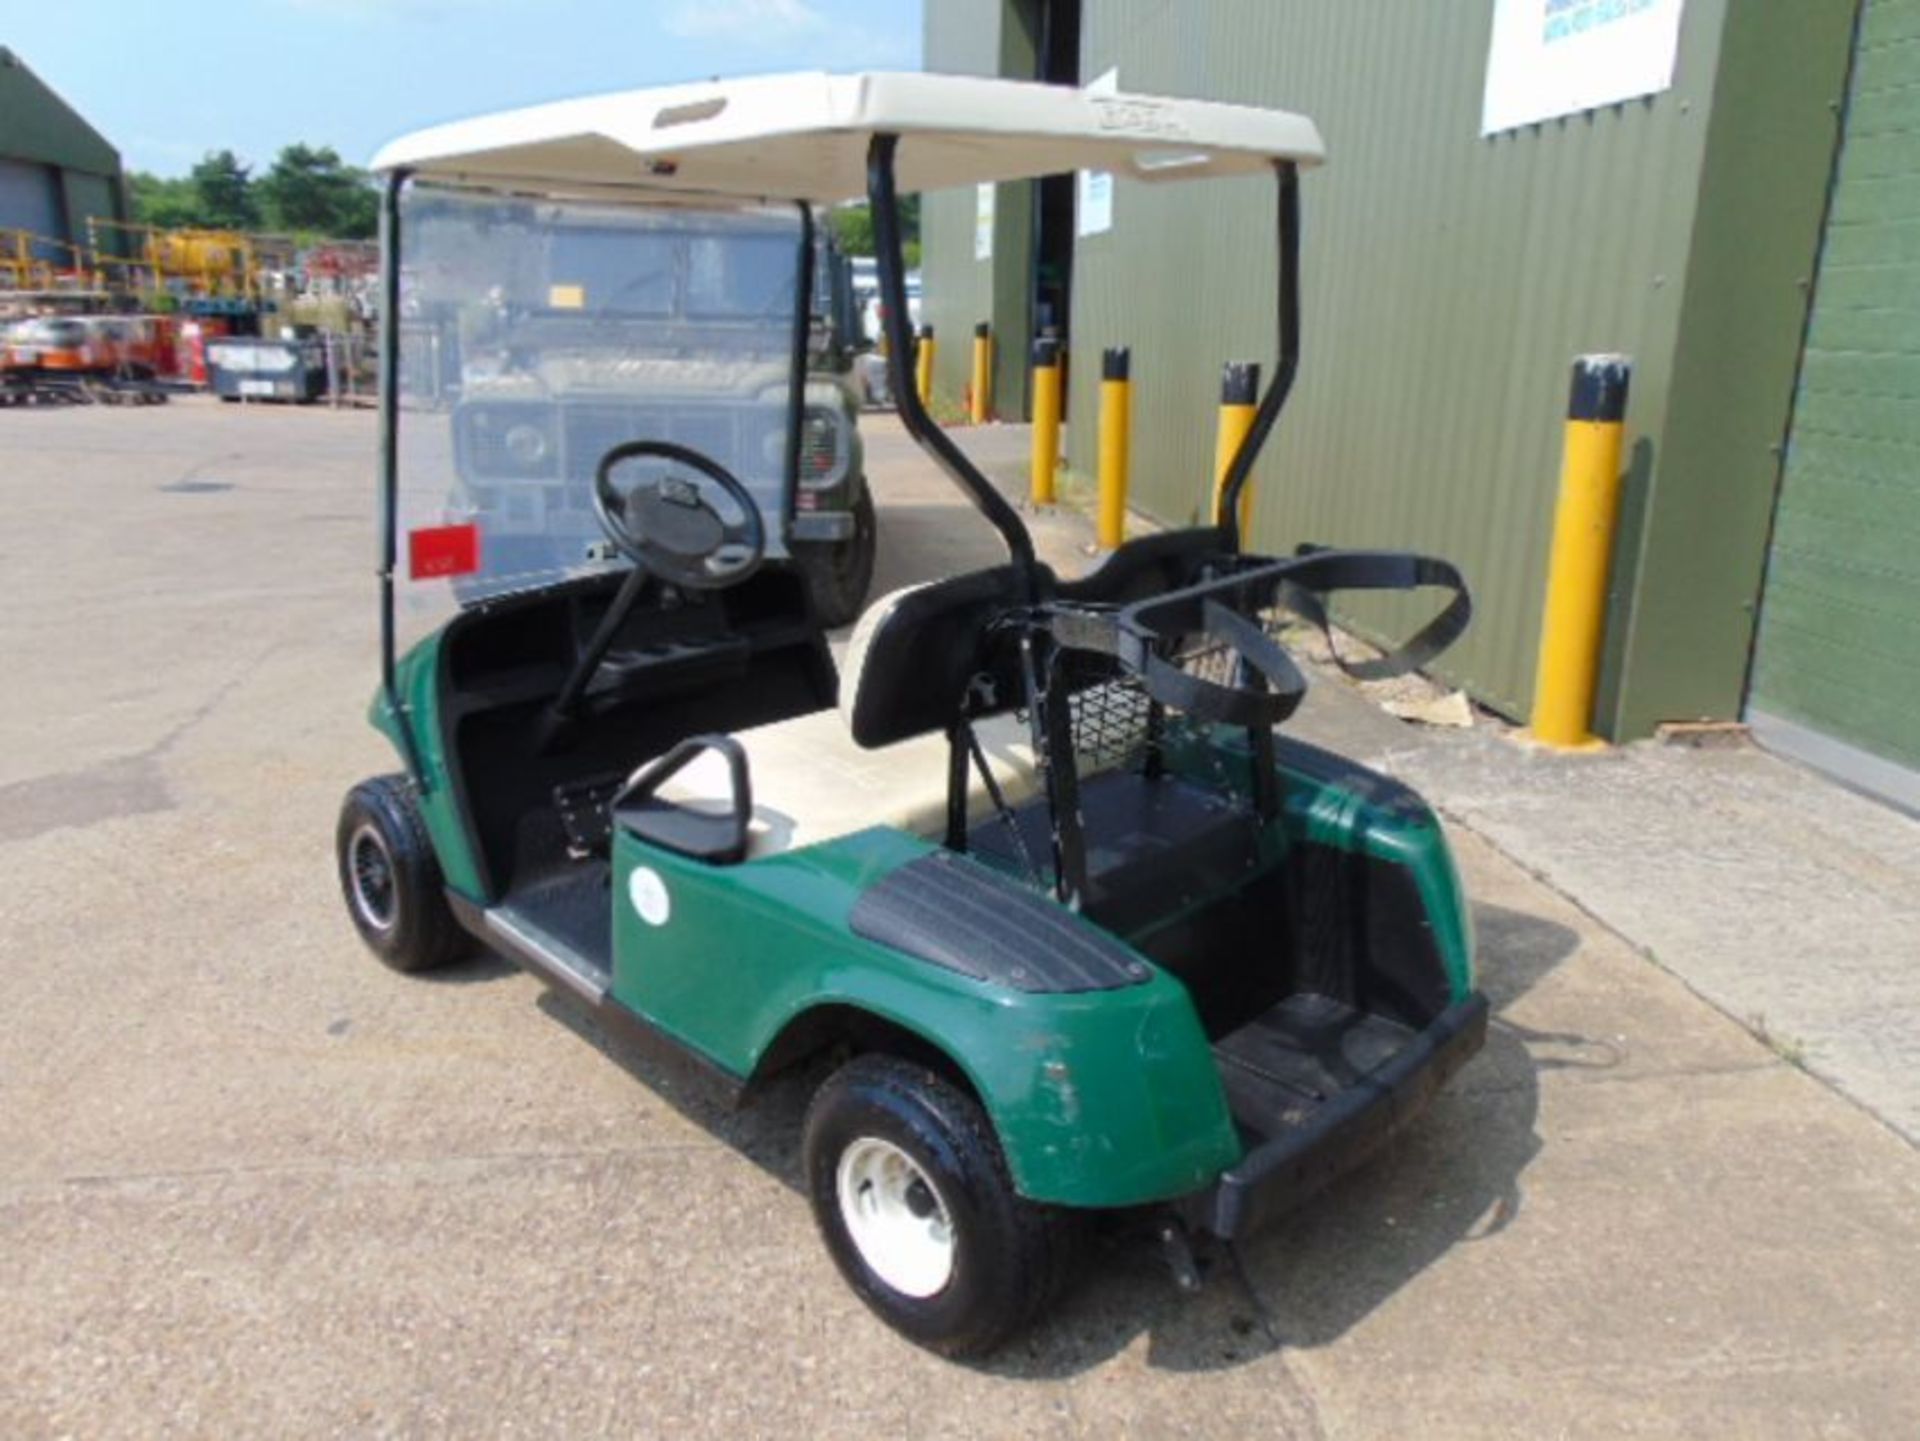 E-Z-GO LPG Gas Powered 2 Seat Golf Buggy - Image 6 of 15